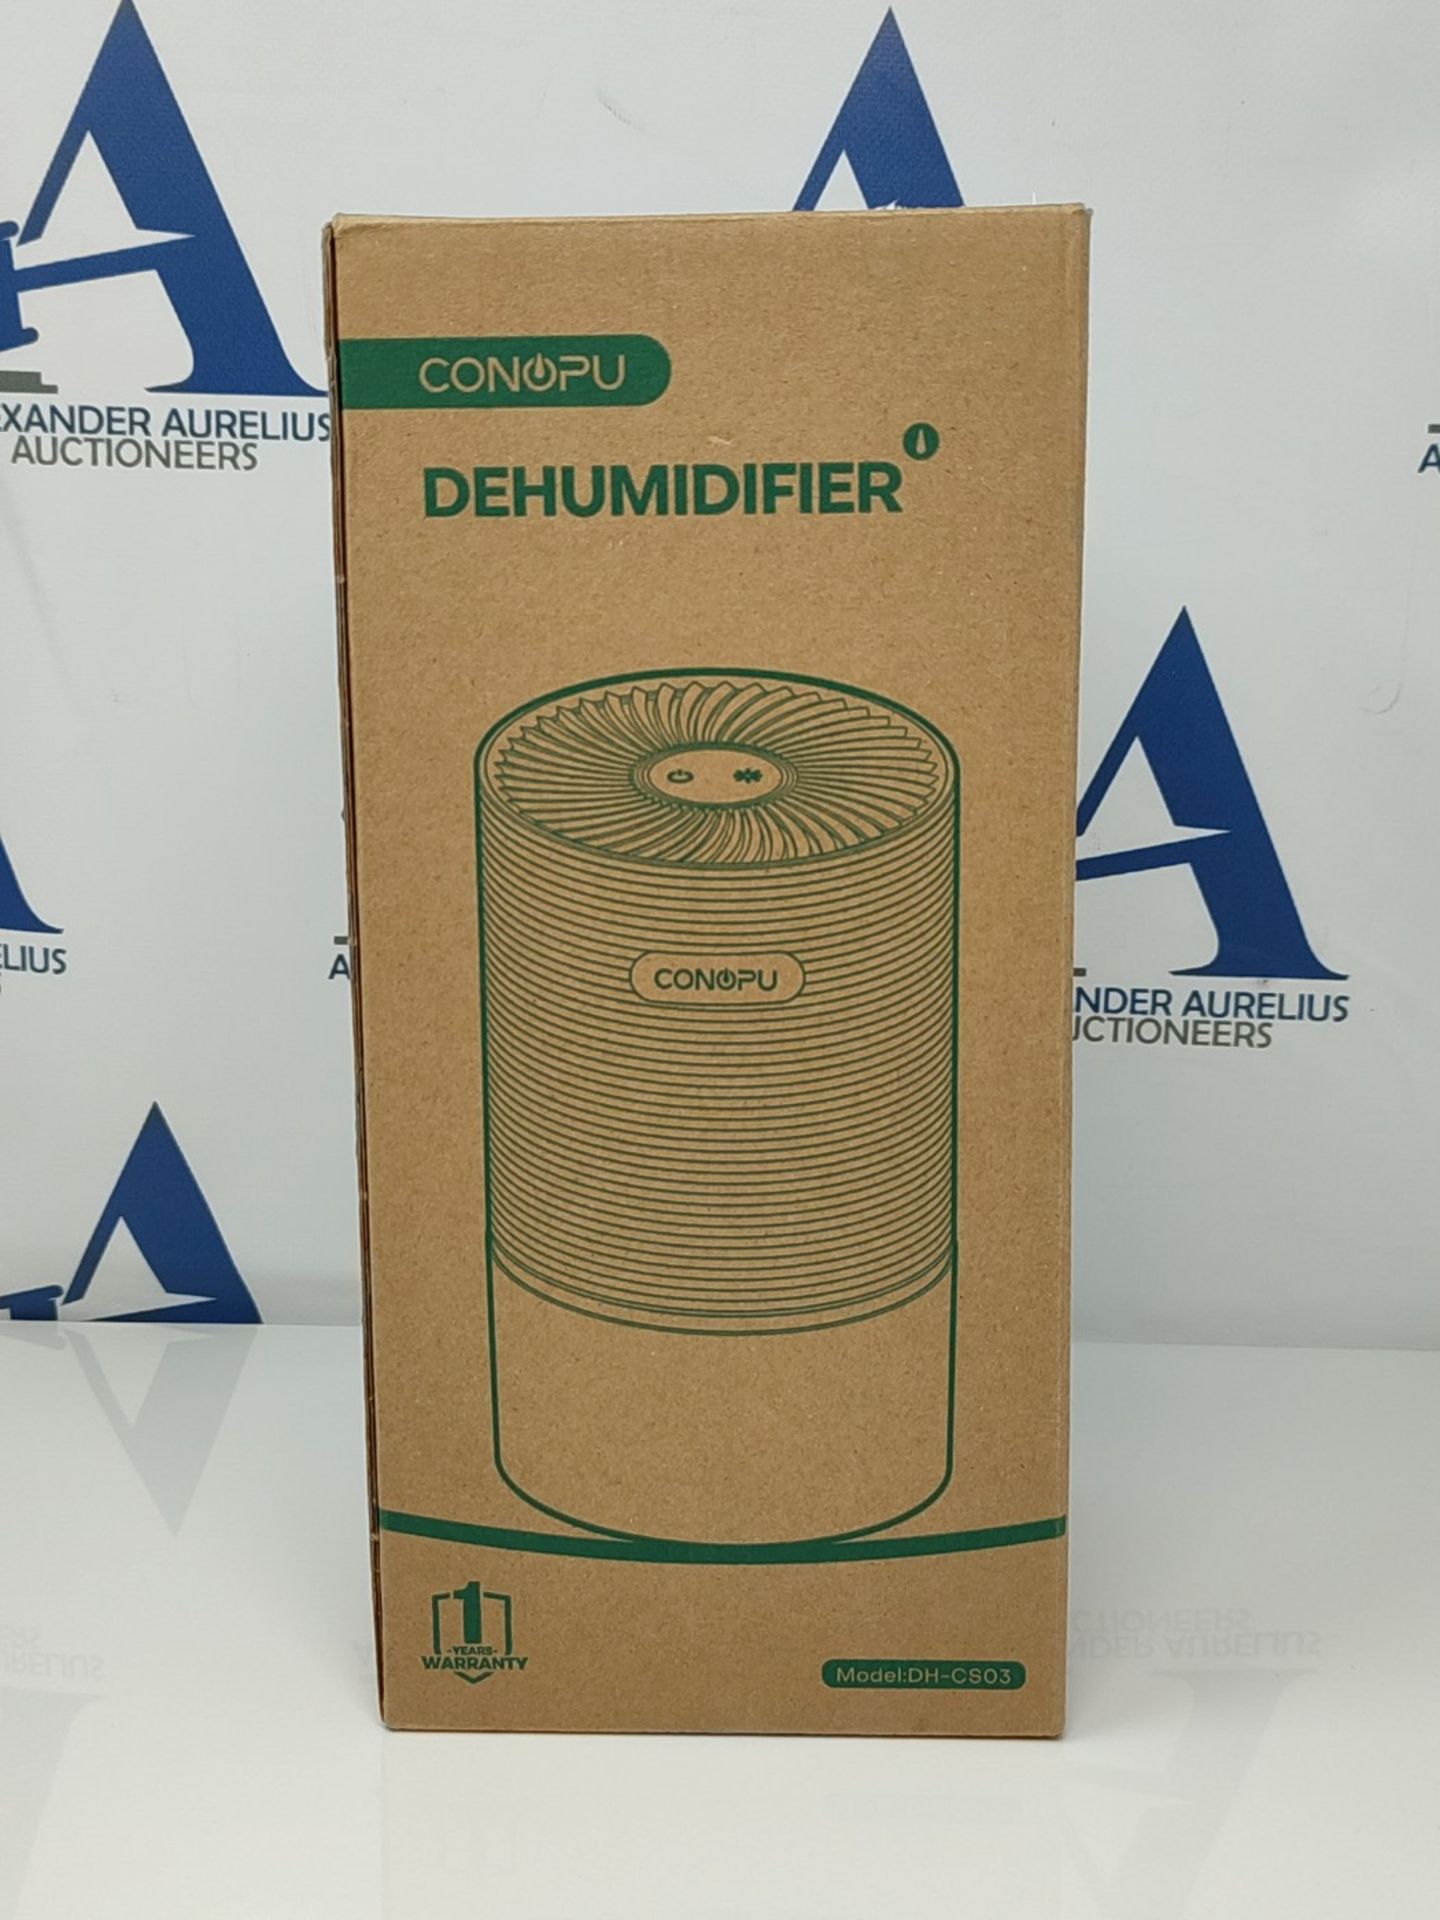 CONOPU Dehumidifiers for Home Drying Clothes Damp, Portable Dehumidifier for Bedroom w - Image 2 of 3